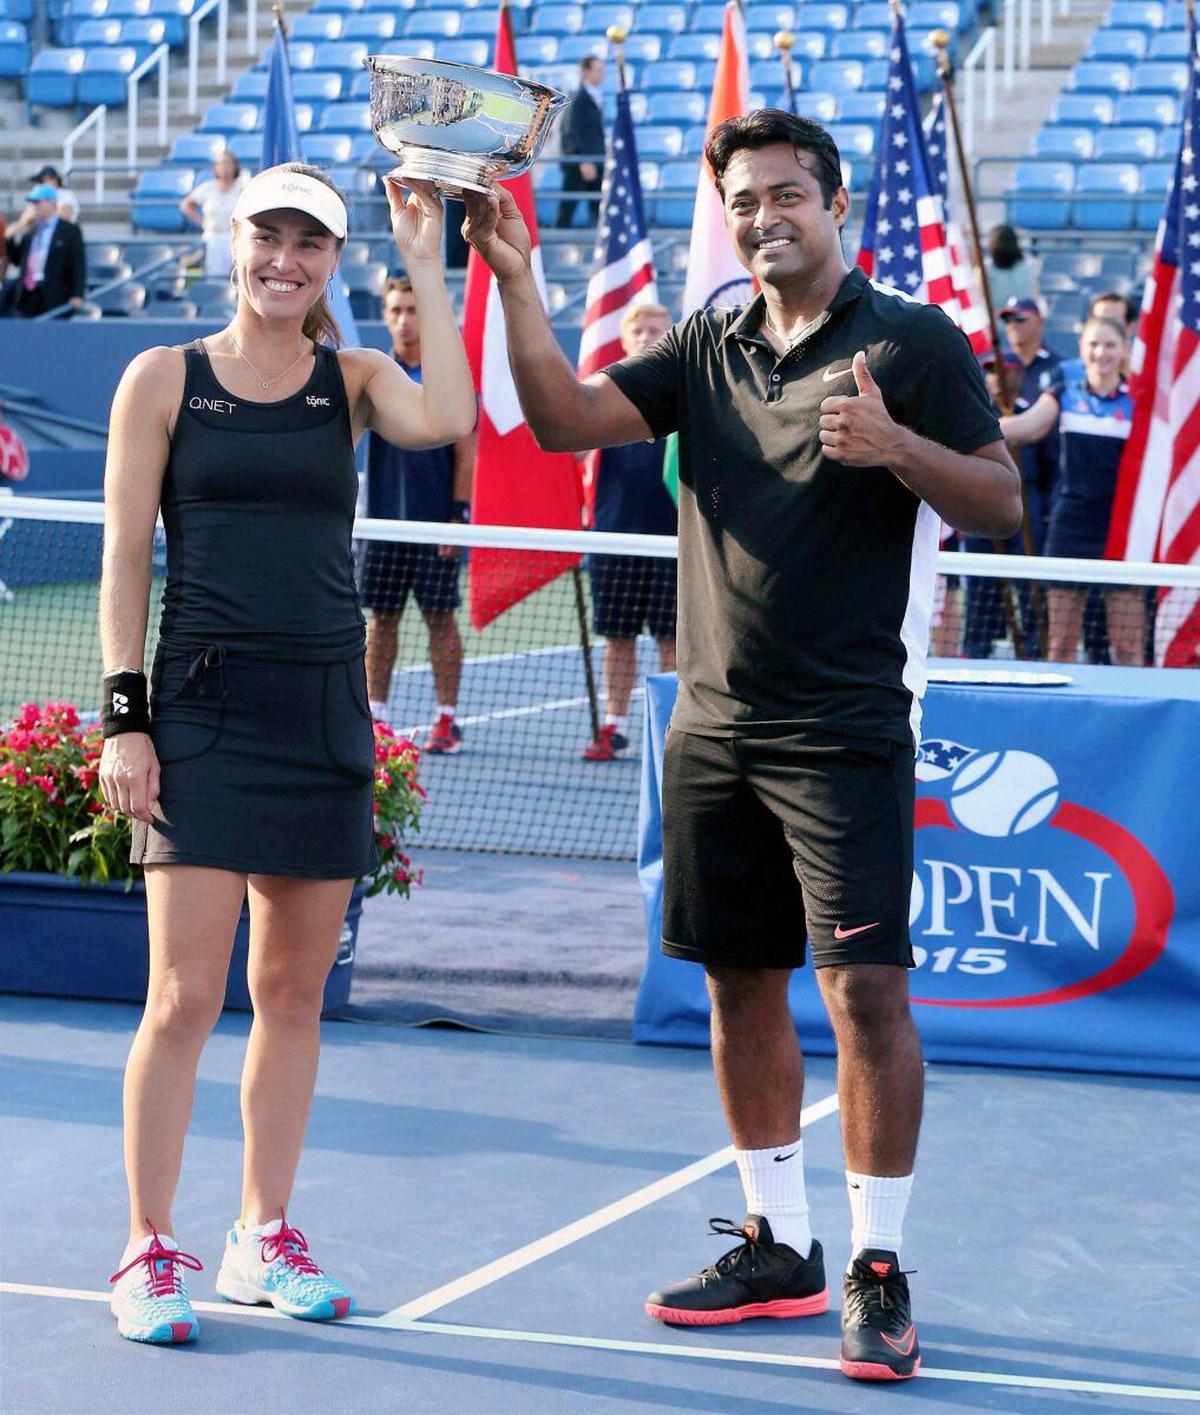 Leander Paes and Martina Hingis pose with the trophy after winning the mixed doubles final match against B Mattek-Sands and Sam Querrey at US Open in New York